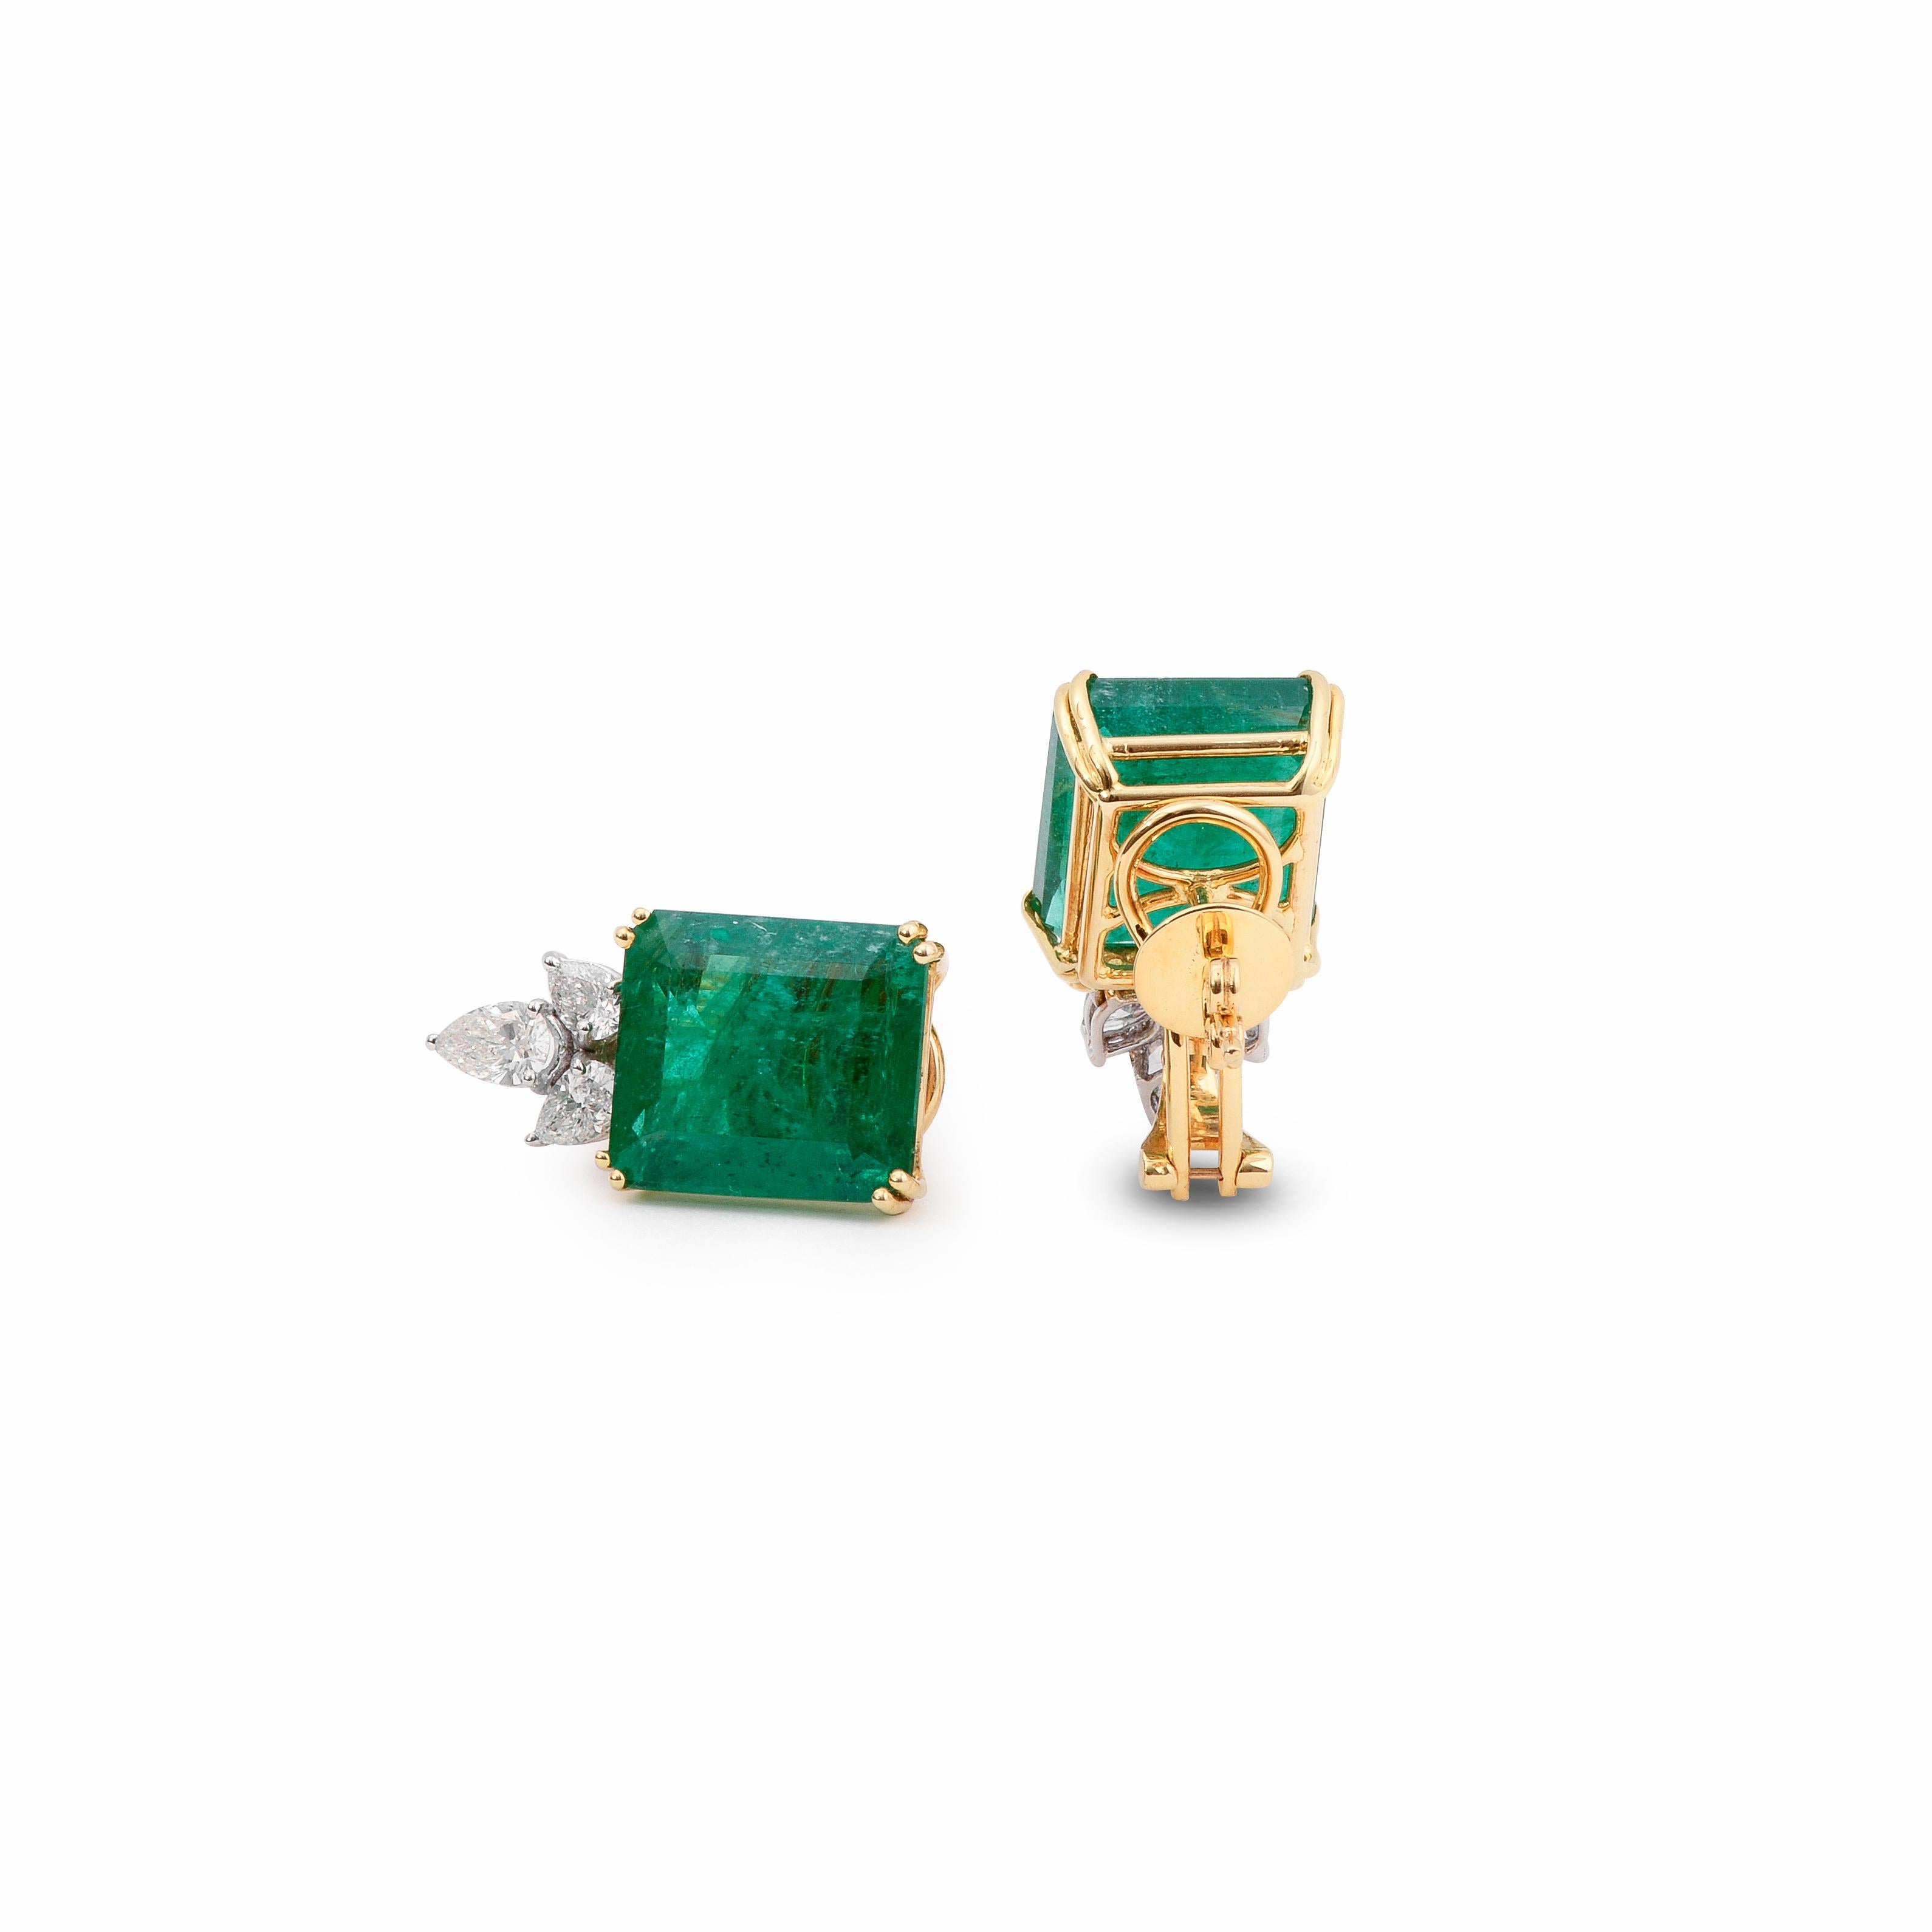 18 Karat Yellow Gold Emerald and Diamond Stud Earrings

This simple pair of earrings studded with gorgeous emeralds set in 18kt yellow gold with rhodium polish, along with white pear shape diamonds (VVS-VS Purity) are perfect to compliment any